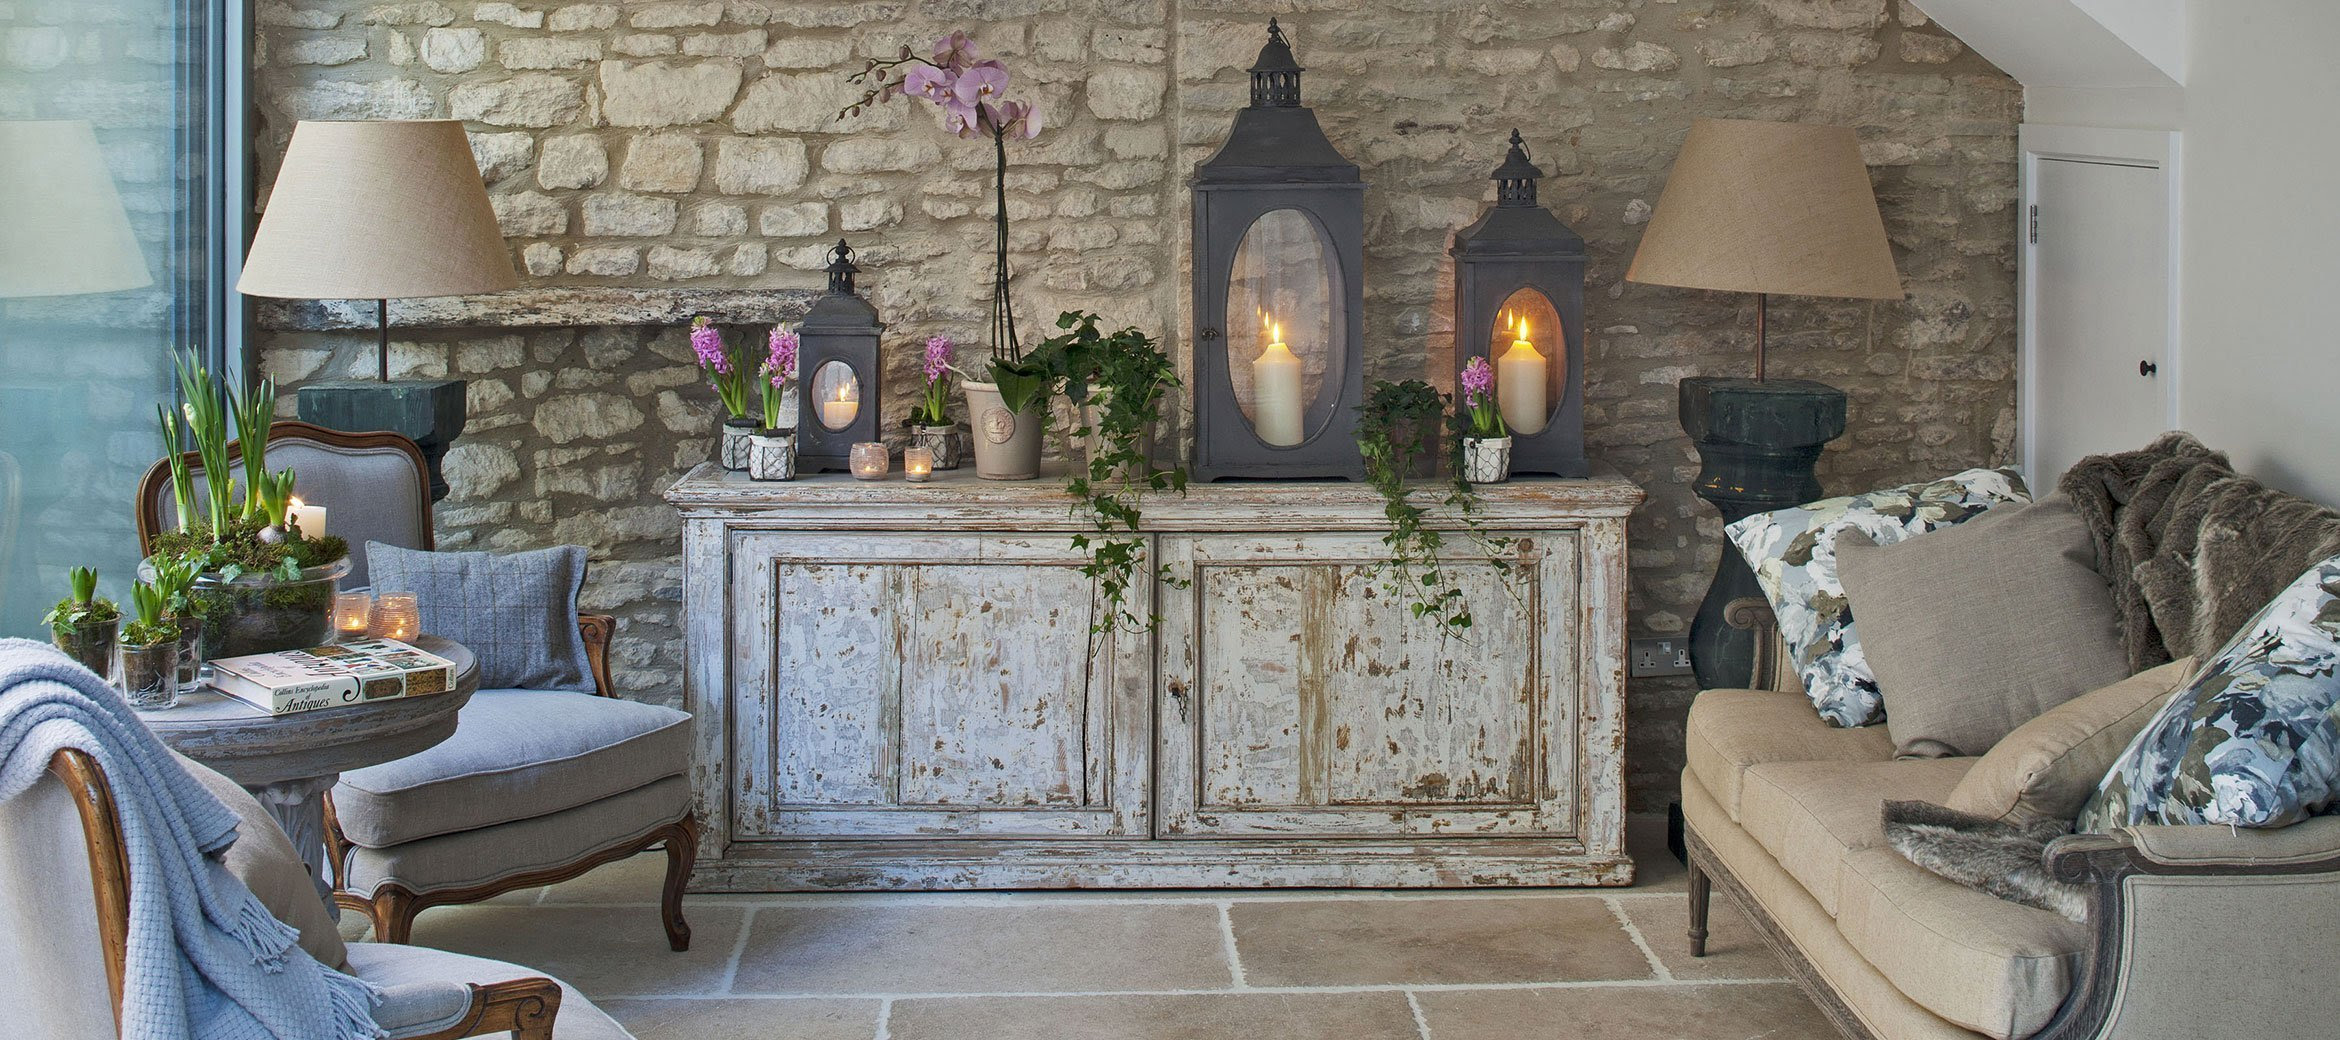 Stunning Cotswold Cottage Living Room Full Home Tour over on Modern Country Style